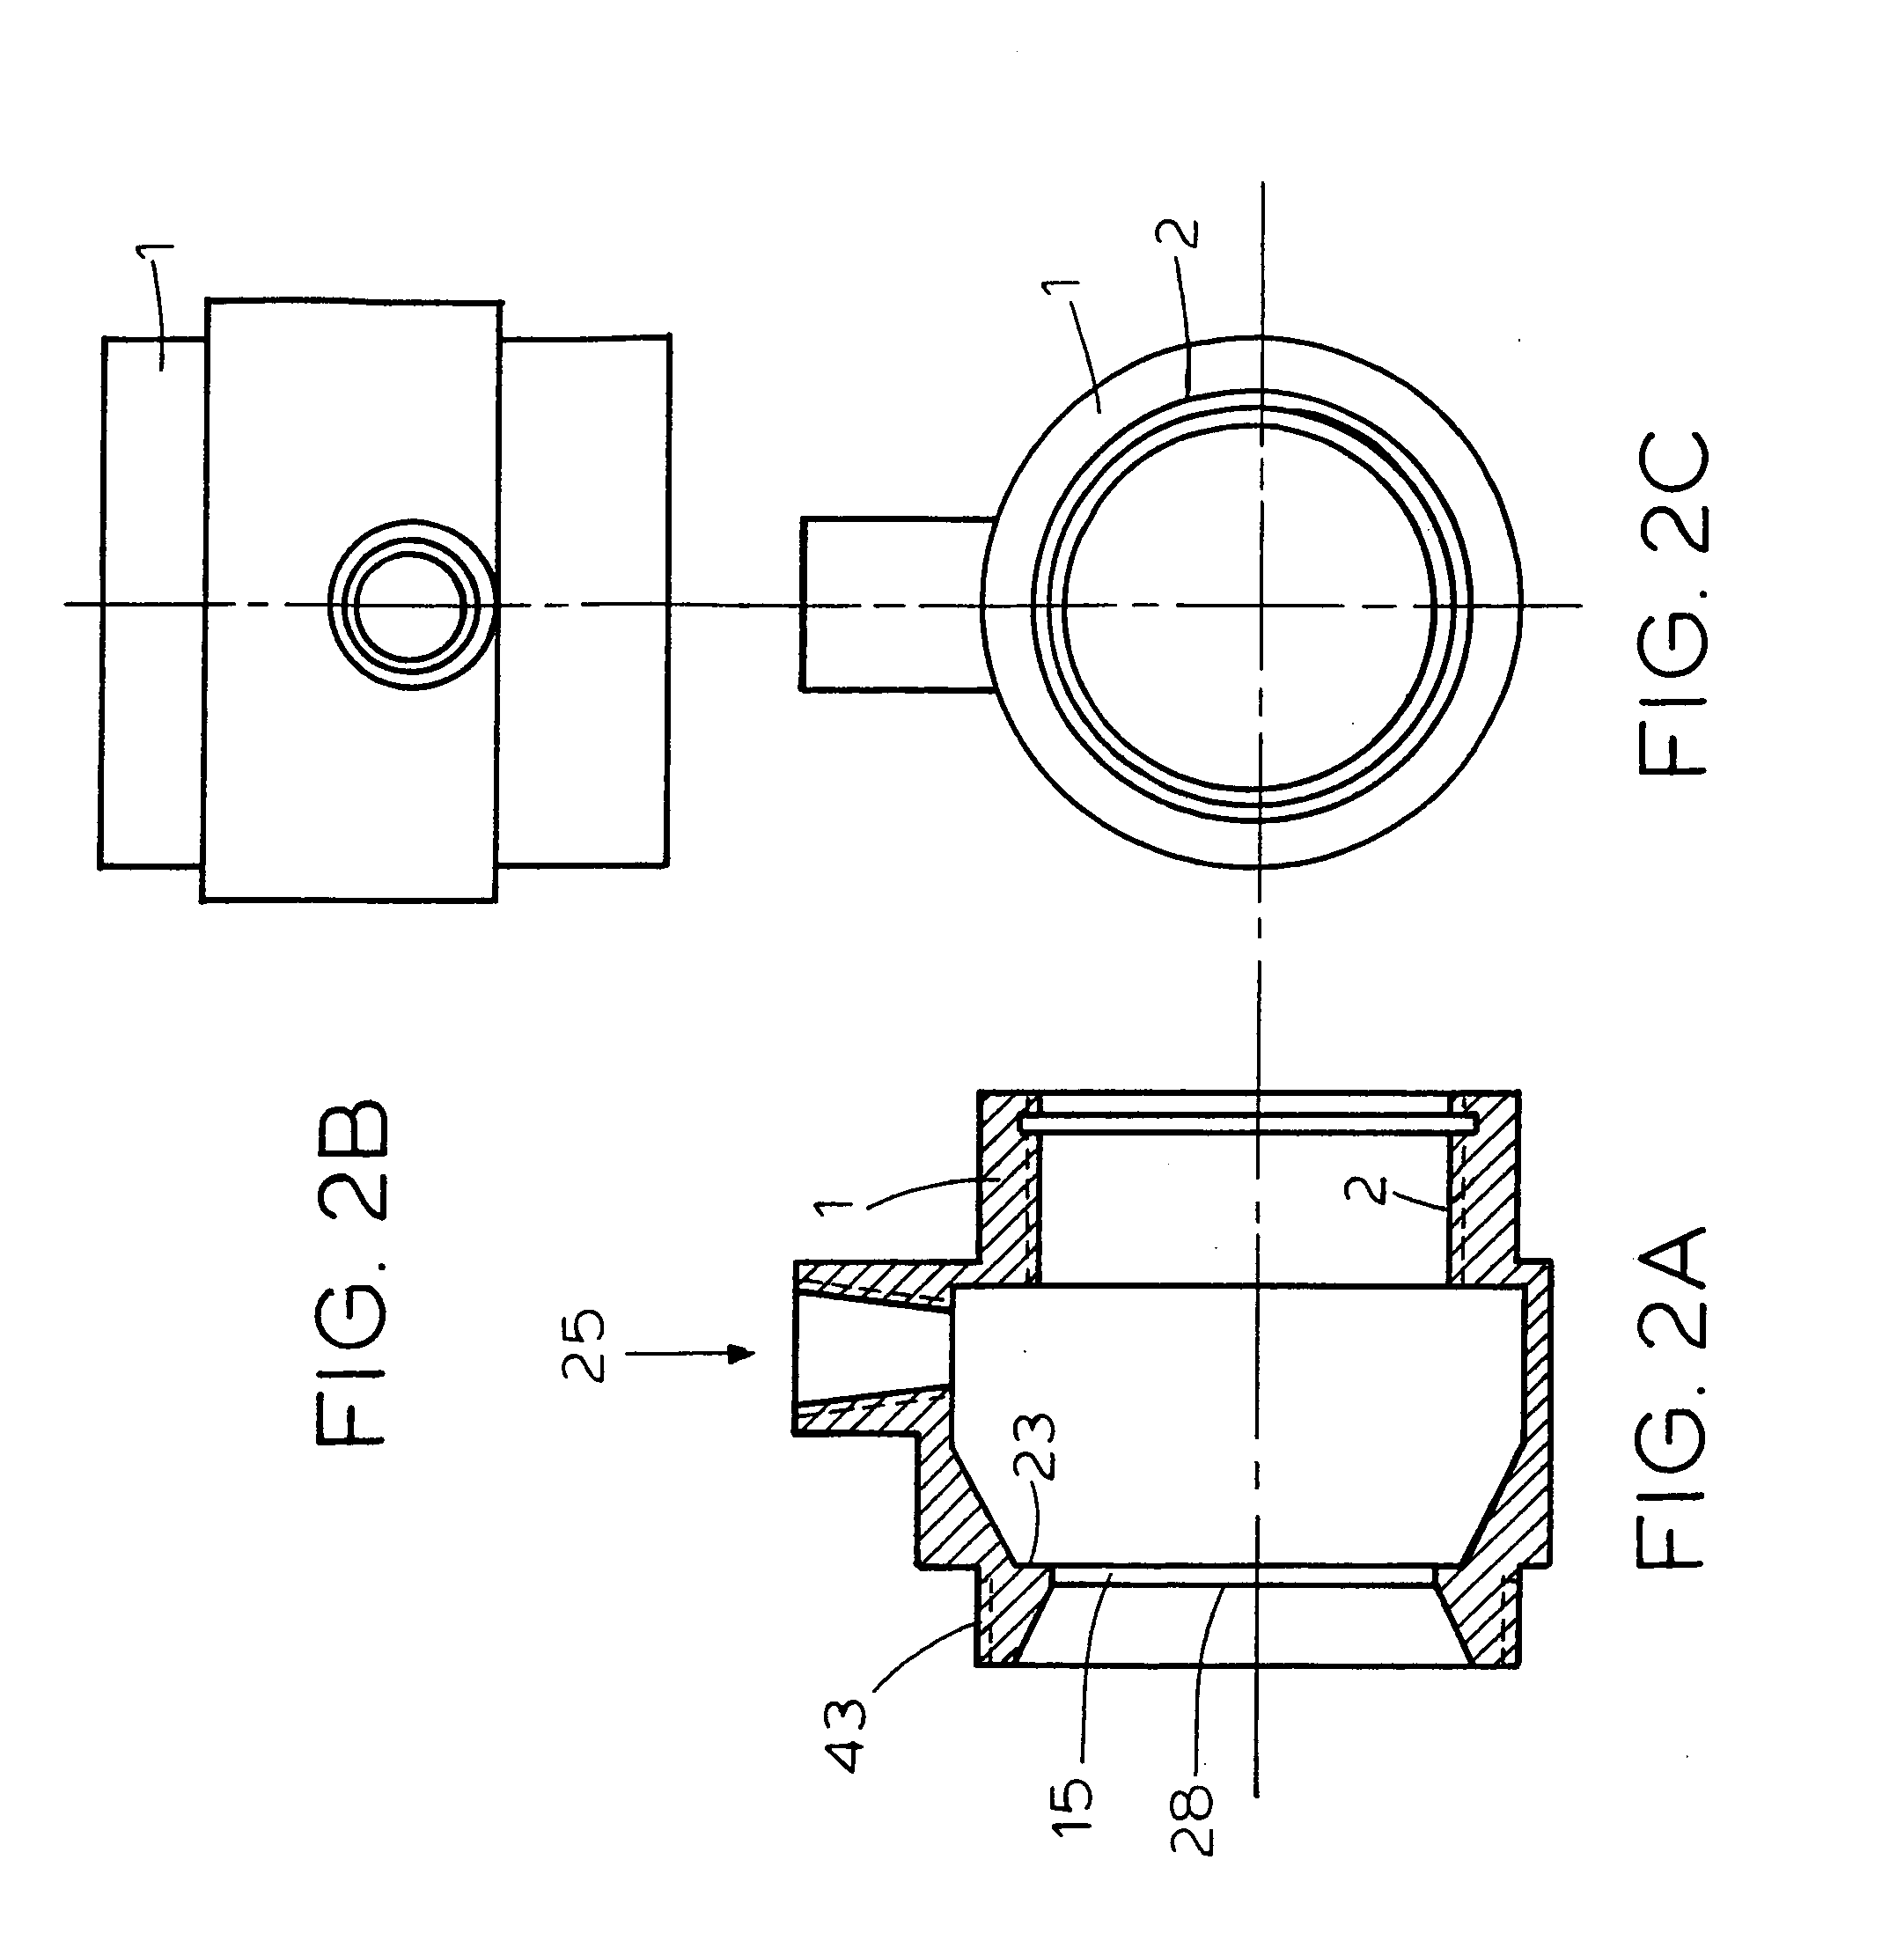 Apparatus and method for treating process fluids